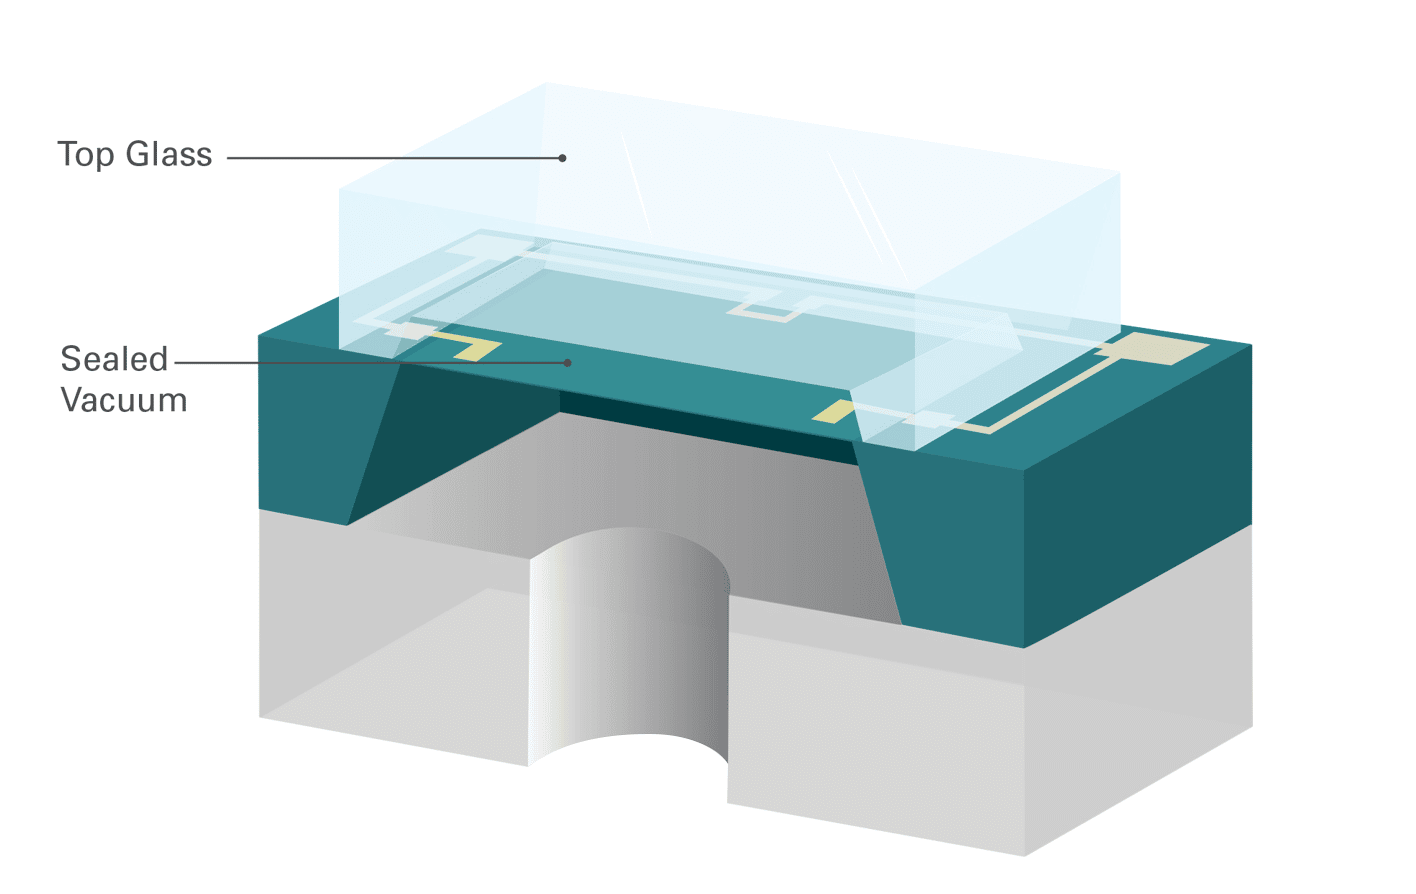 Cross Section of a MEMS Silicon Die with Top Glass